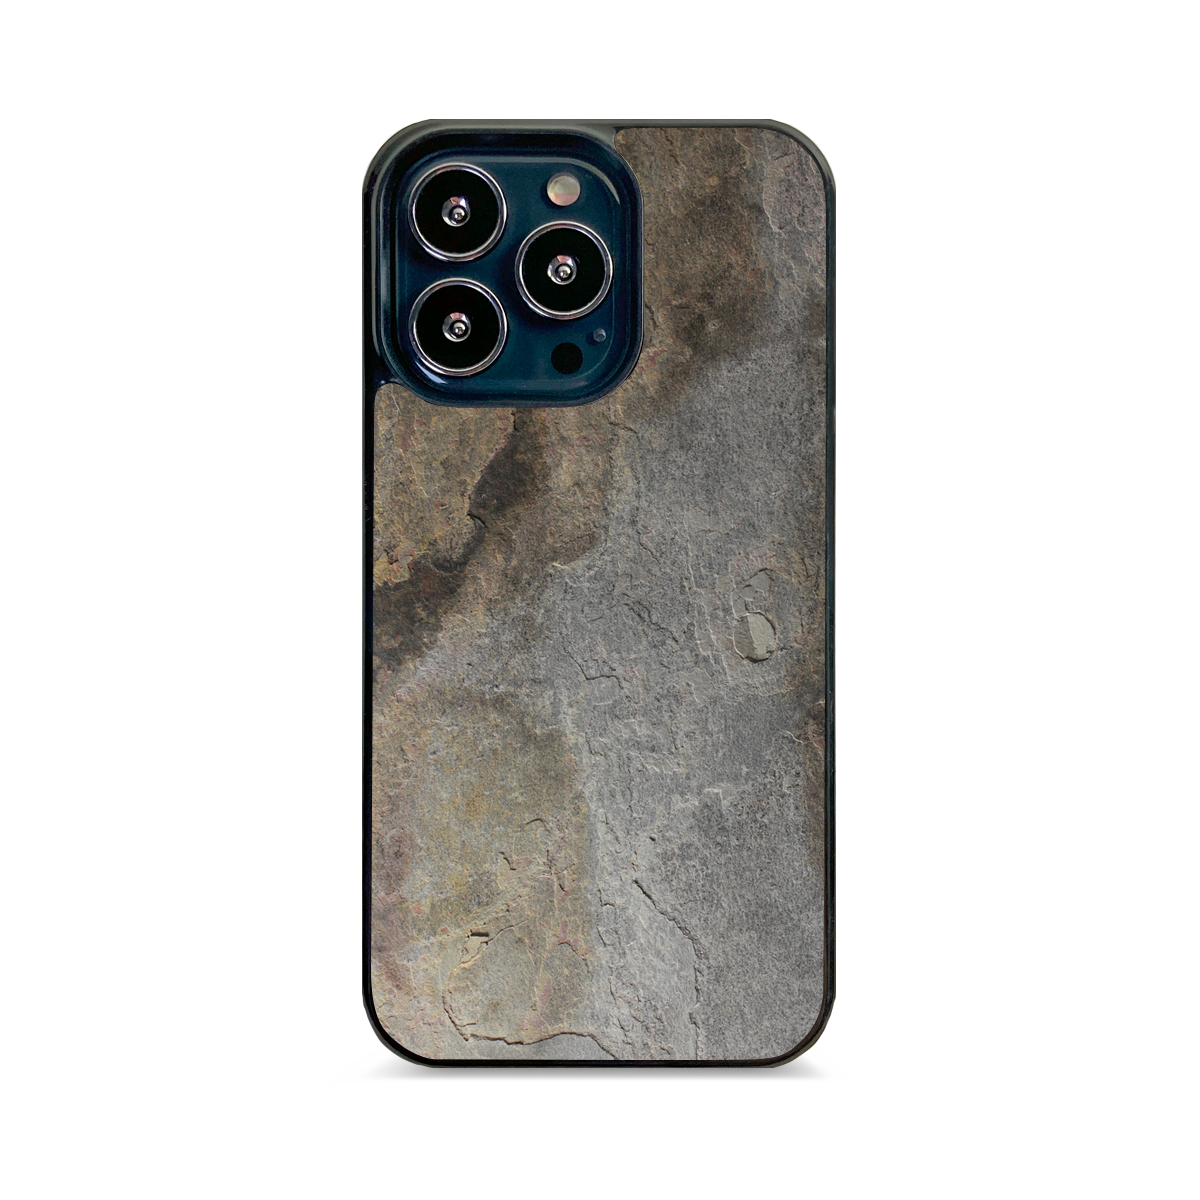 IPhone 13 Pro Max protective stone cases